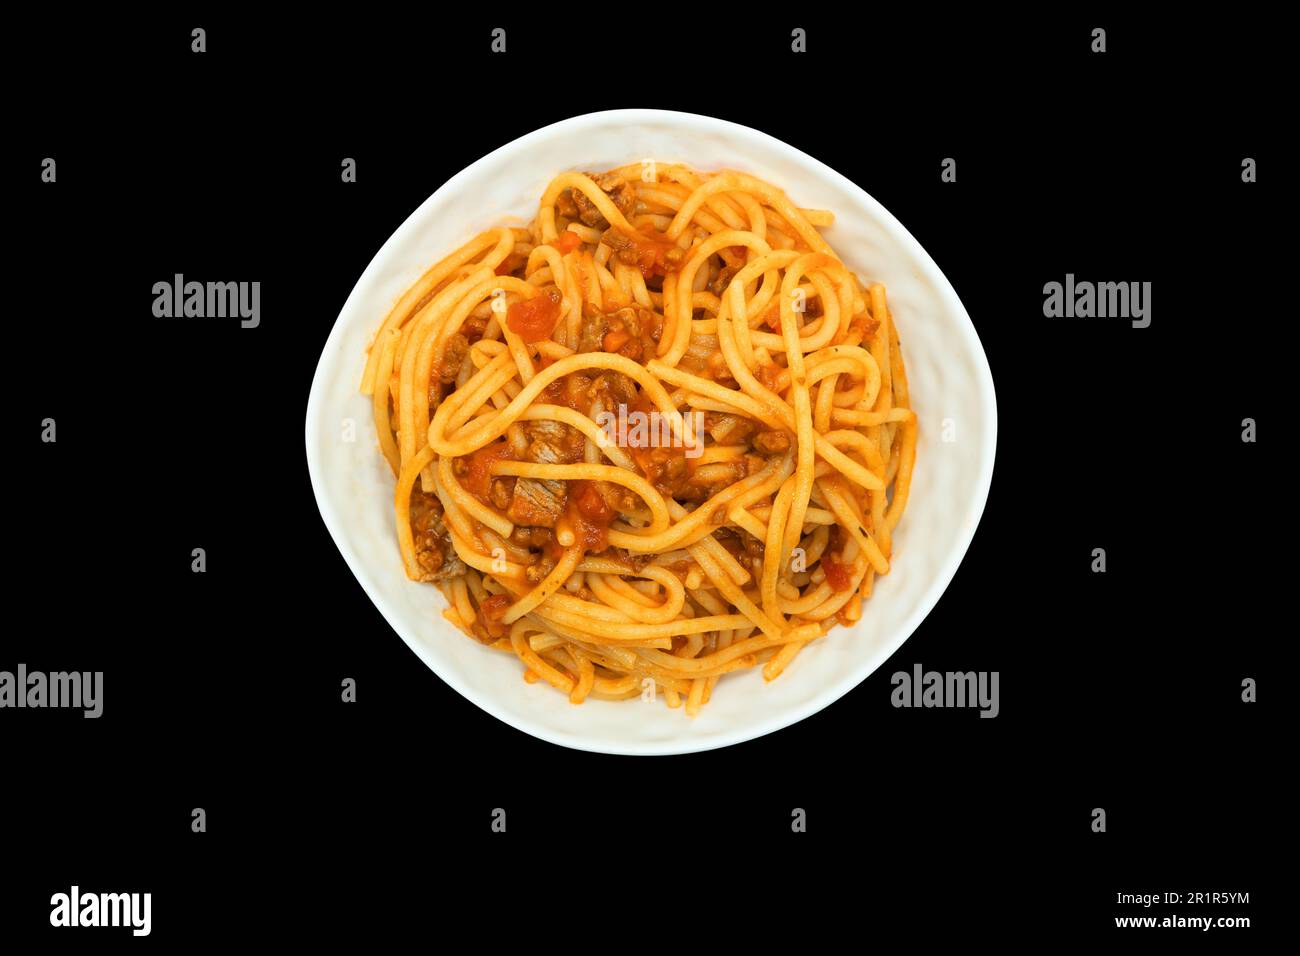 Classic italian bolognese sauce with pasta. Preparing lasagna. Making sauce. Italian food with noodles in plate isolated on black background. Meat ste Stock Photo